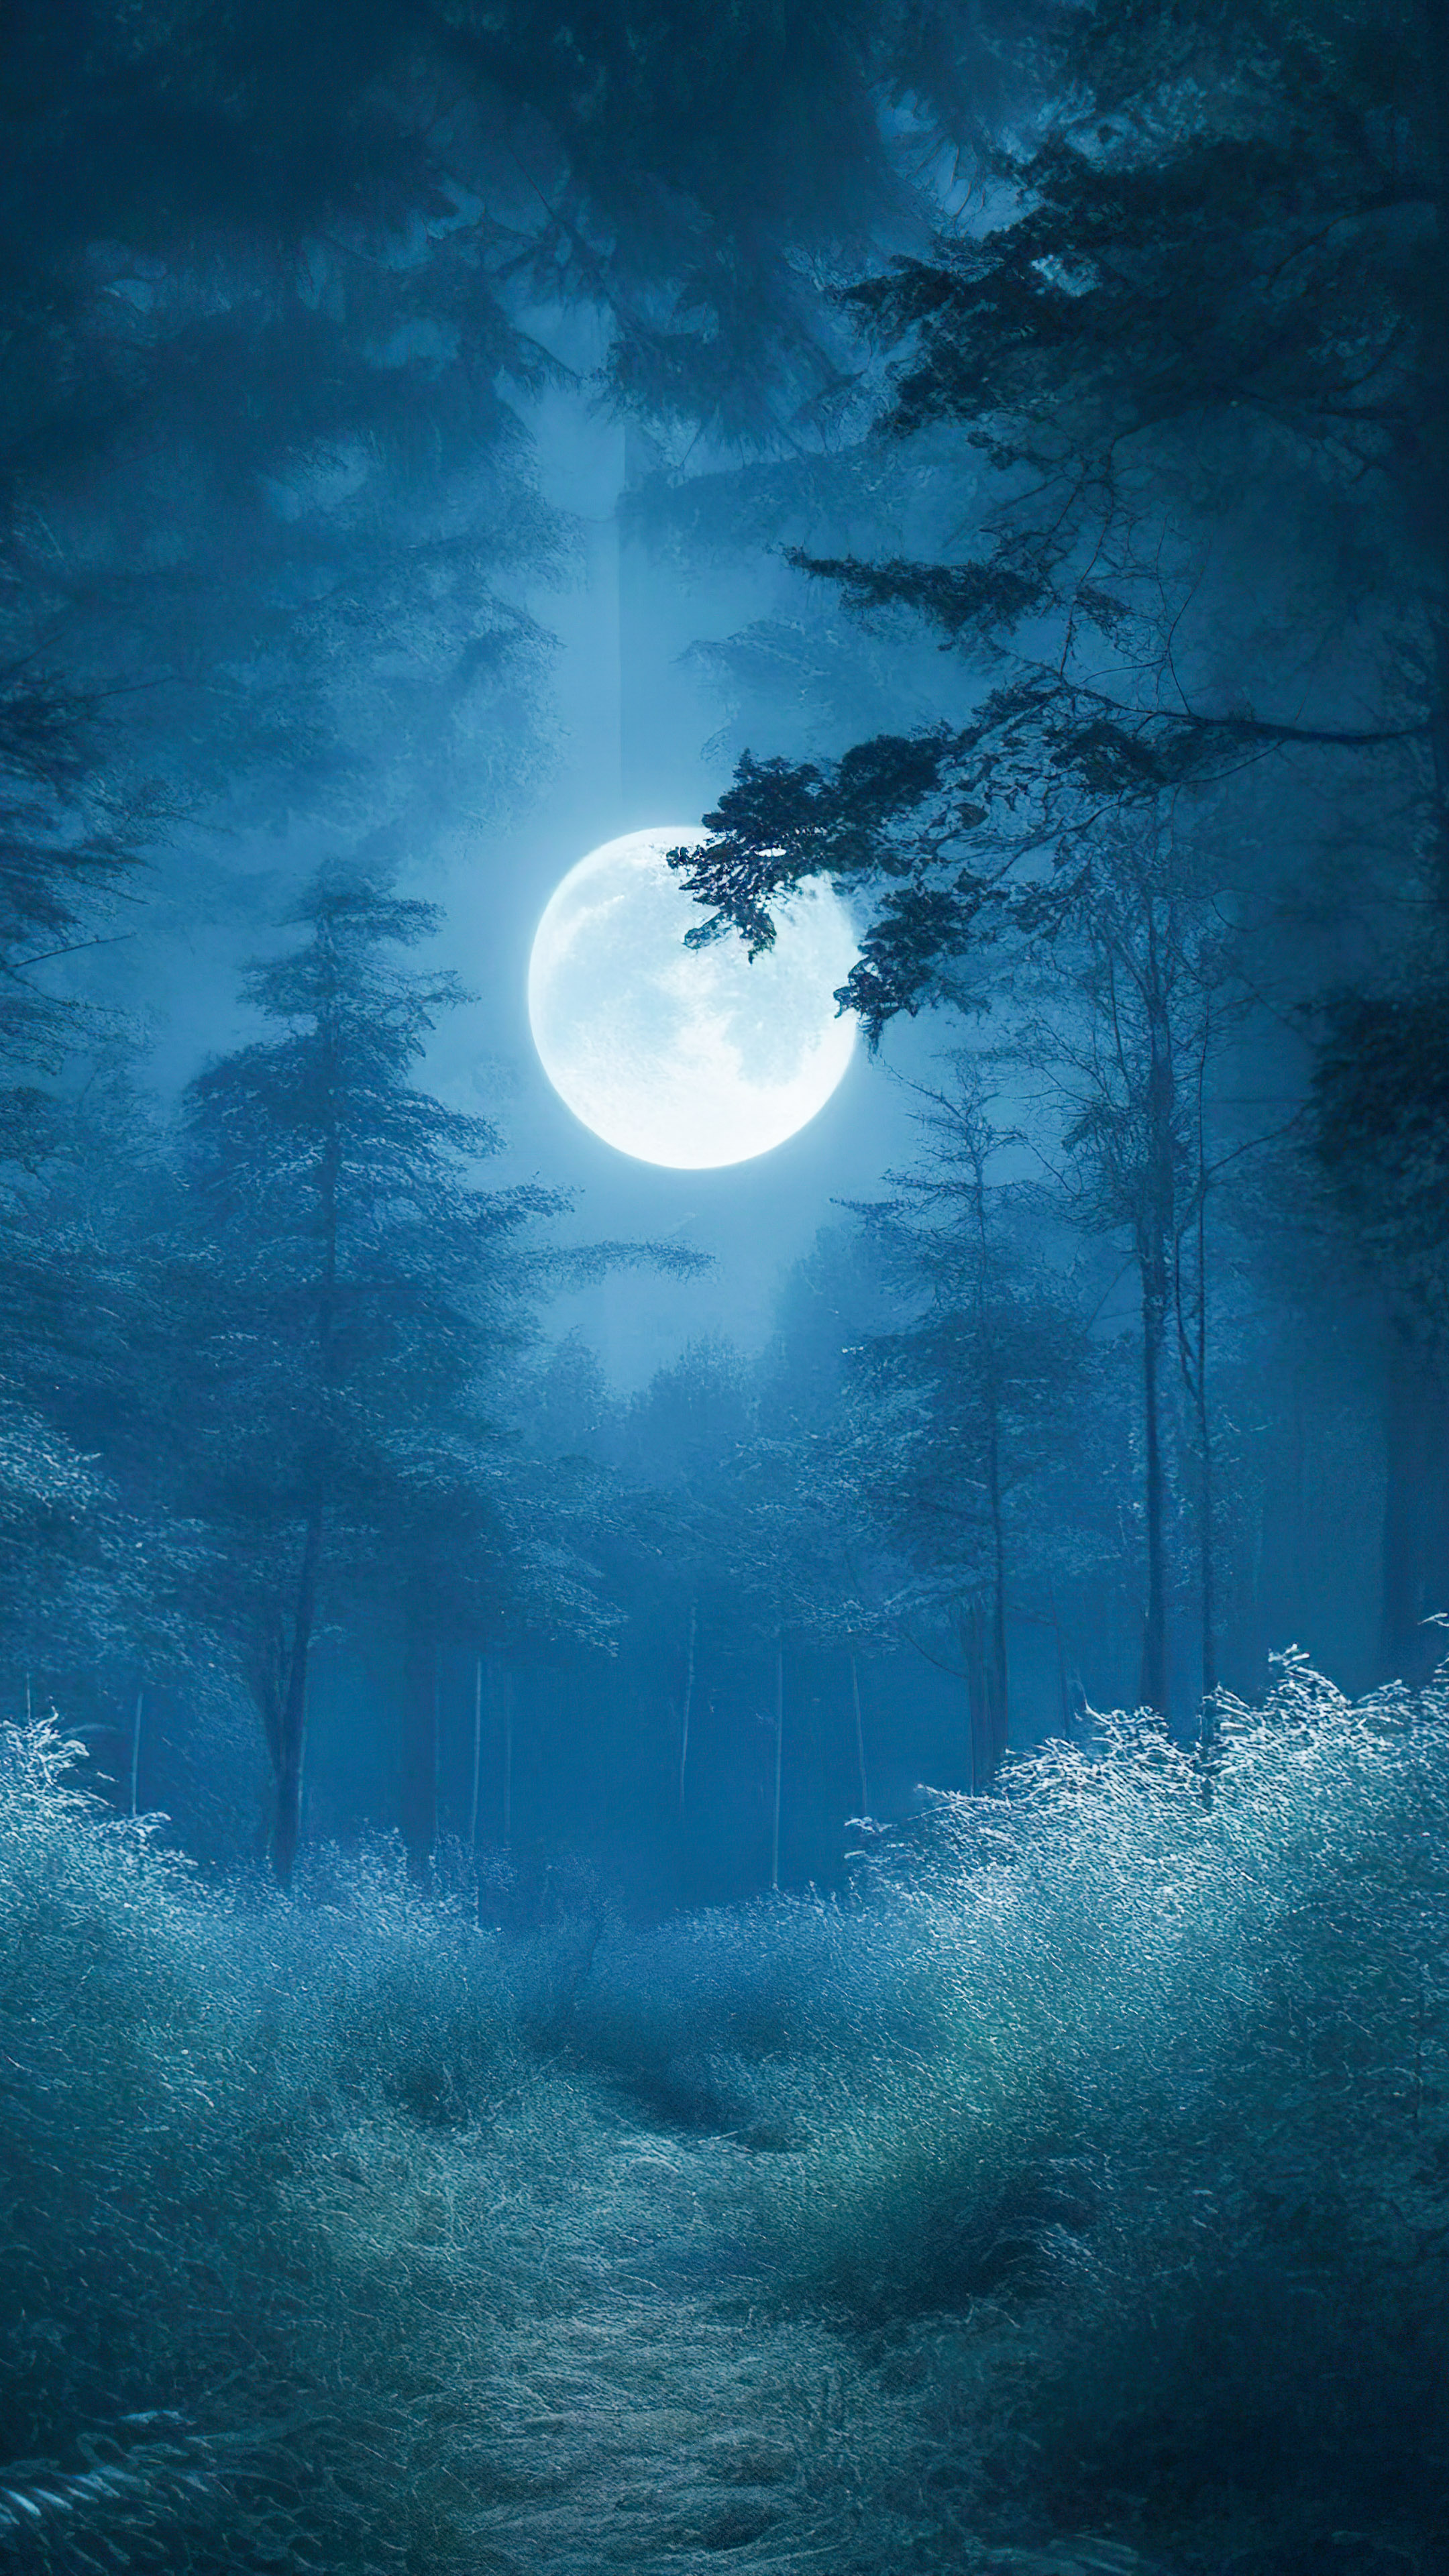 Transform your iPhone with our 4K nature wallpaper, featuring a mystical forest shrouded in mist, with towering trees and an eerie, ethereal ambiance